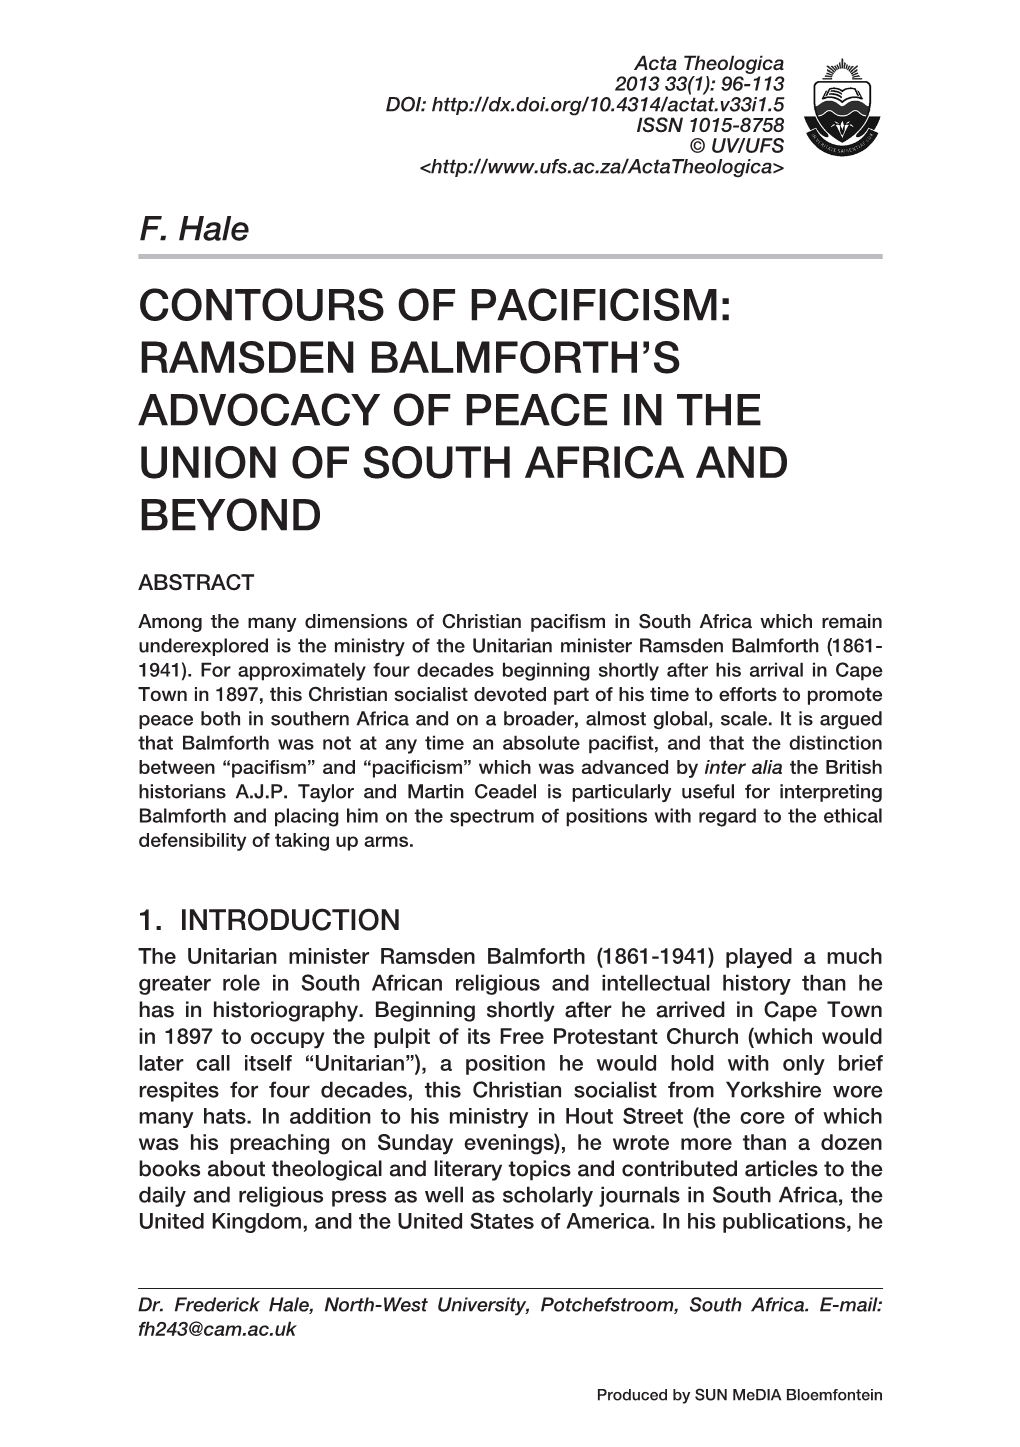 Contours of Pacificism: Ramsden Balmforth's Advocacy of Peace in the Union of South Africa and Beyond